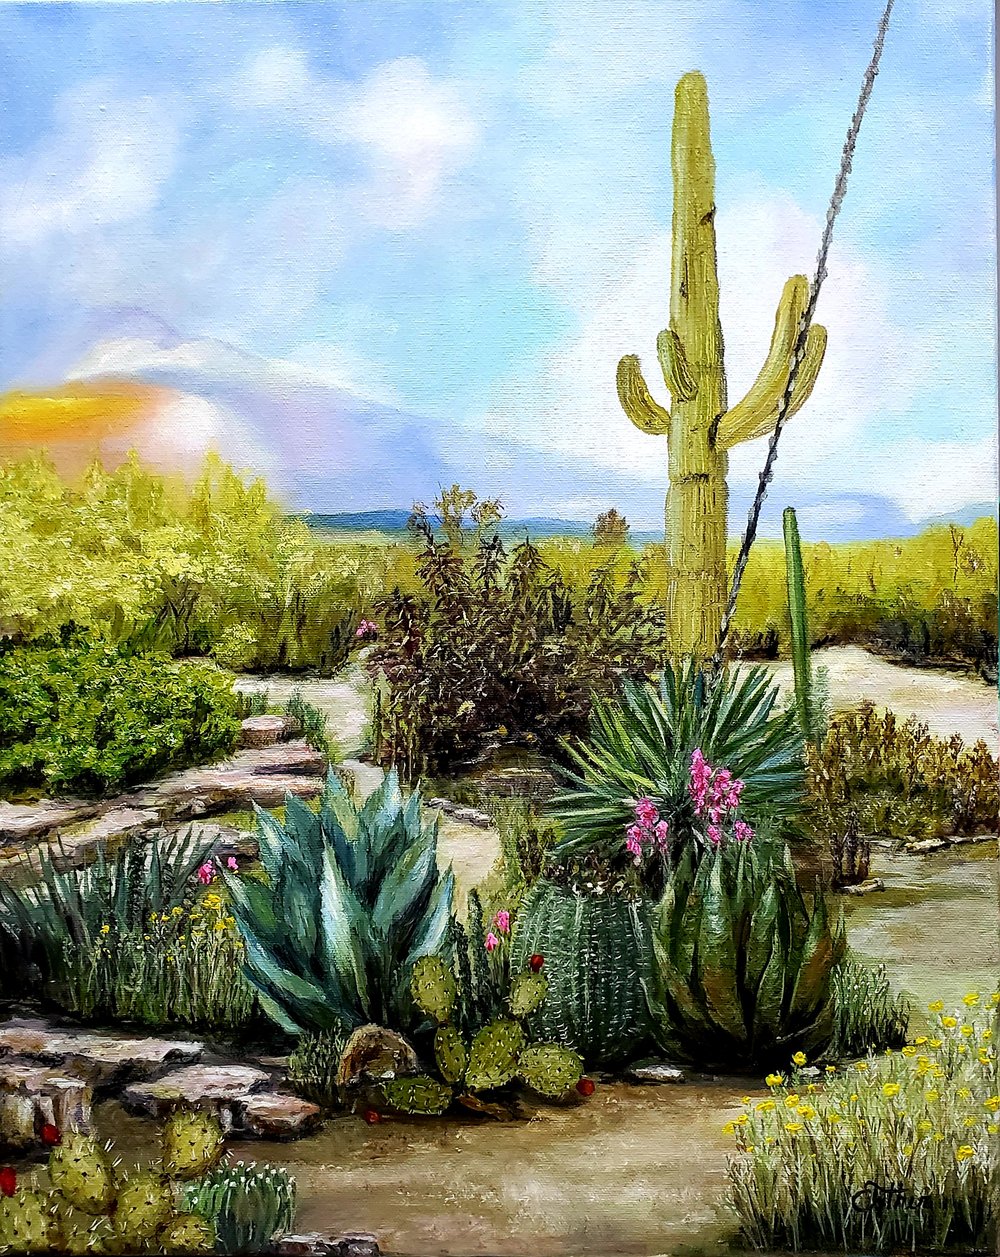 Image of Arizona Dreaming by Esther Scott